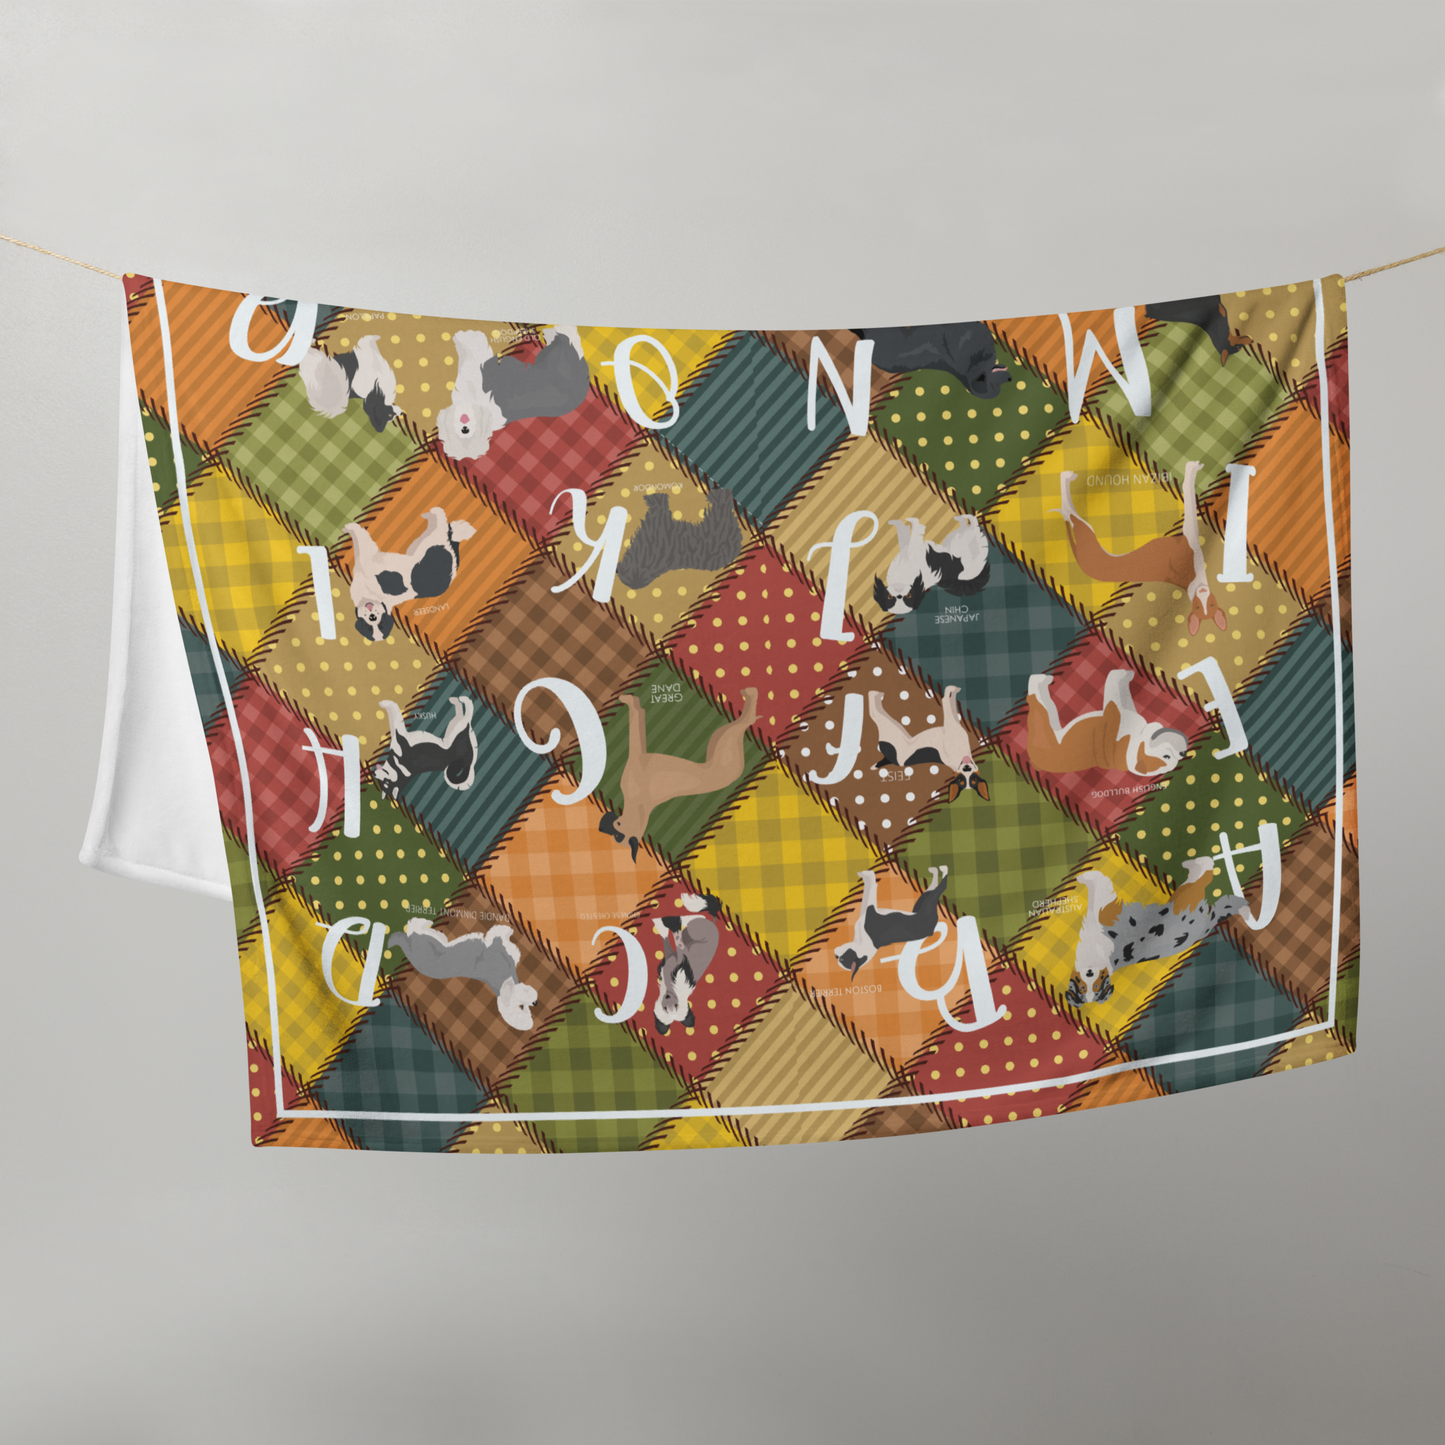 A to Z Dogs! - Throw Blanket